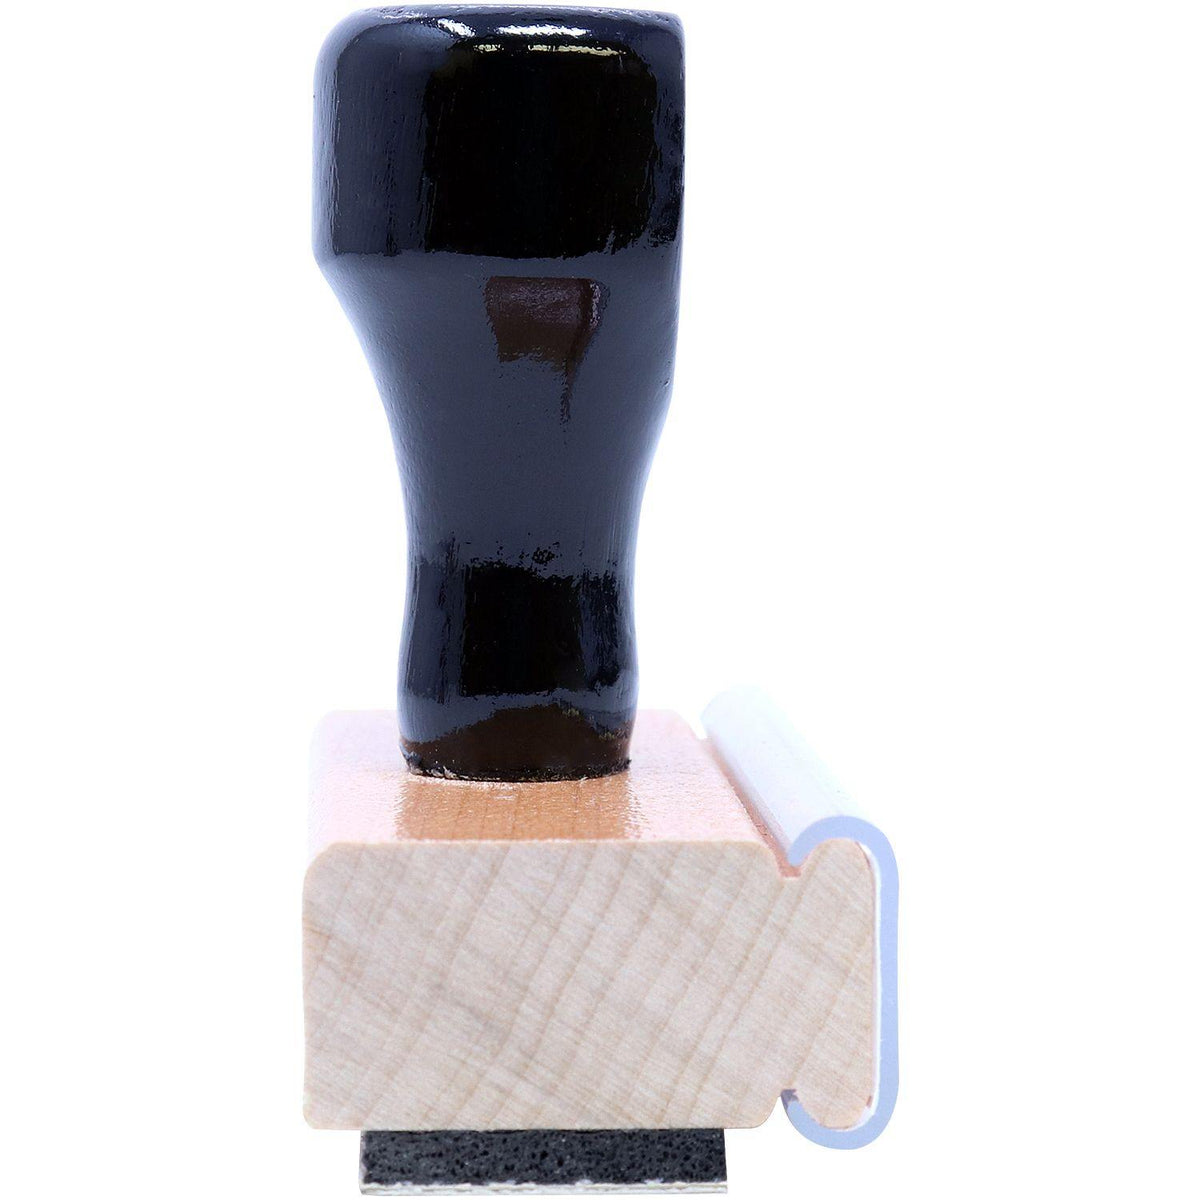 Side View of Large Archivar Rubber Stamp